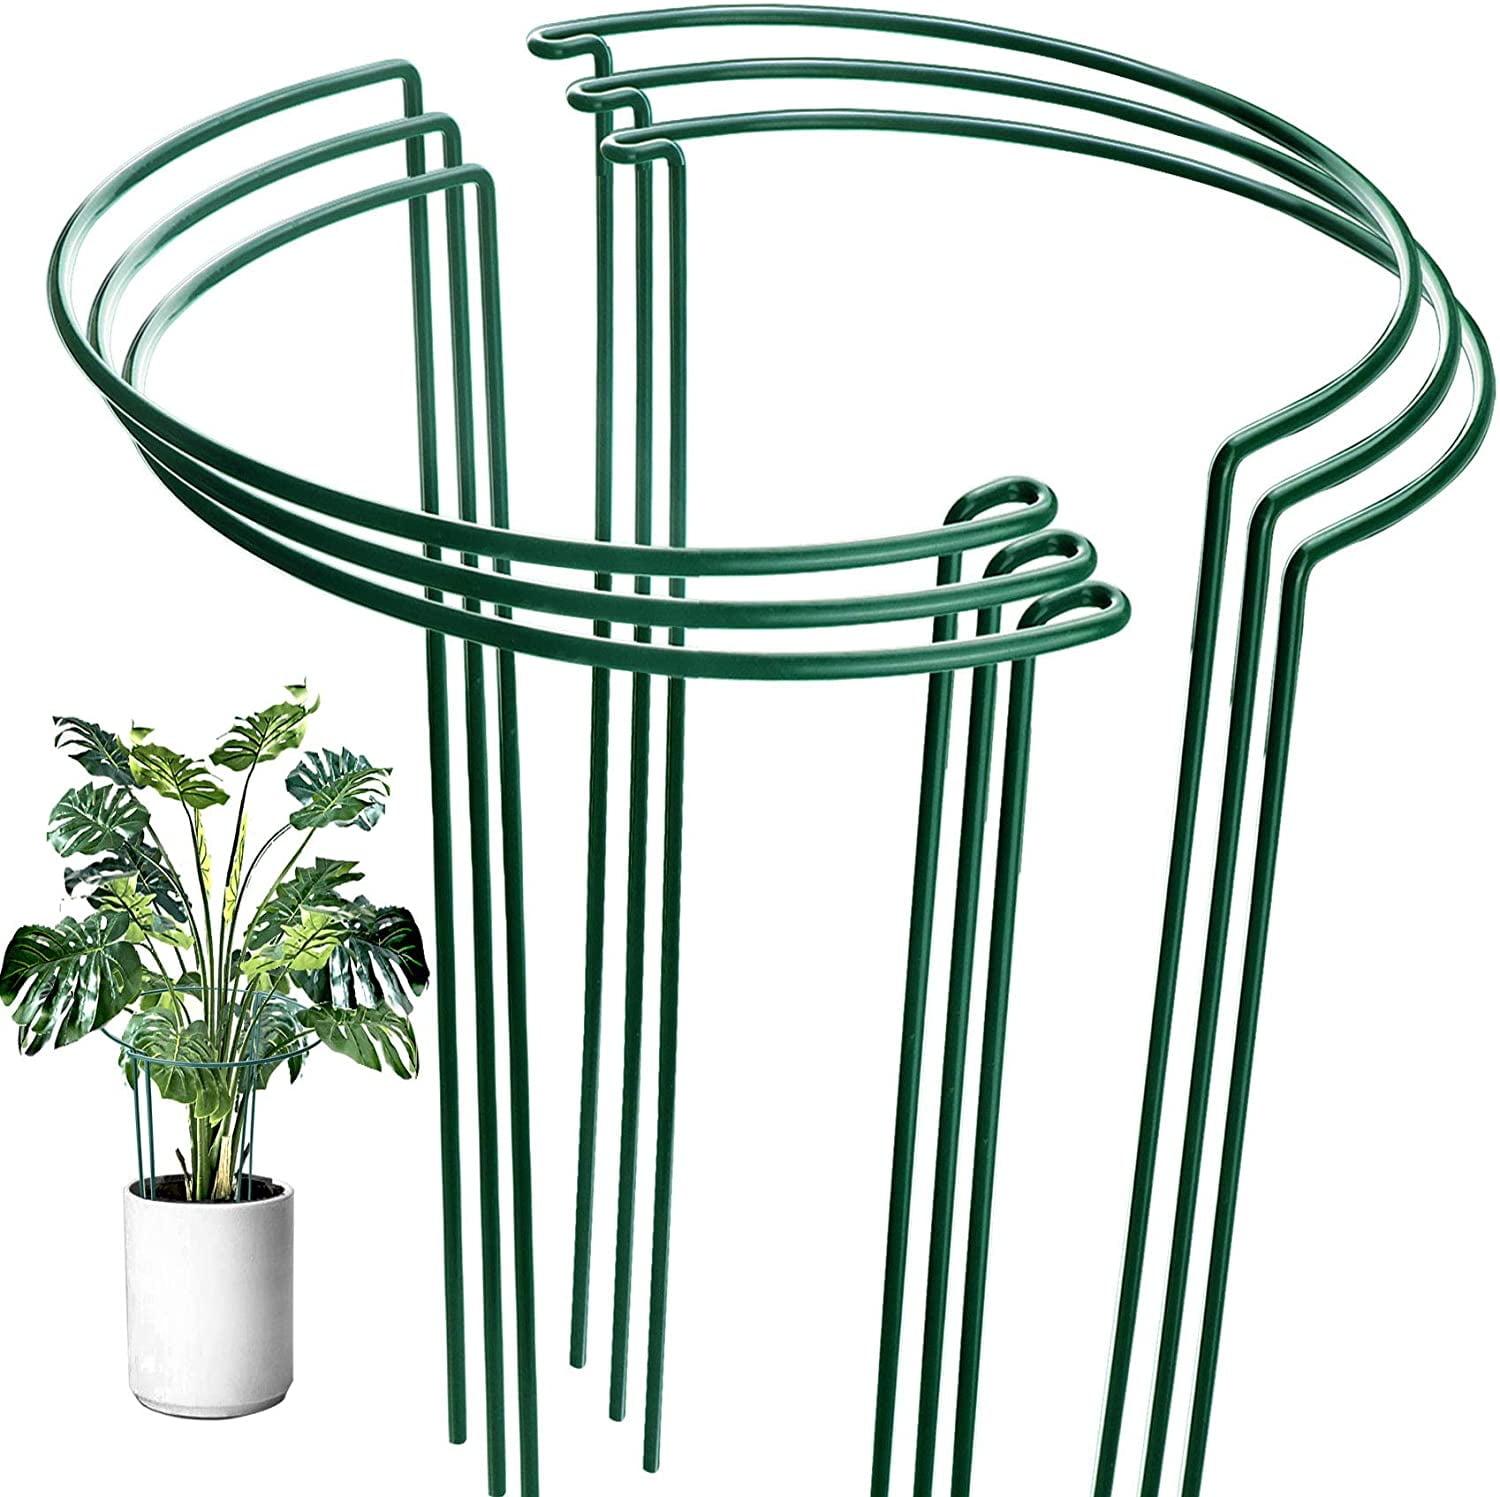 Plant Support Rings BLIKA 20 Pack Garden Plant Support Stake Outdoor Tall Plant Support Ring Cage 10 Wide x 15.8 High Half Round Metal Plant Stake Plant Supports for Outdoor Plants 